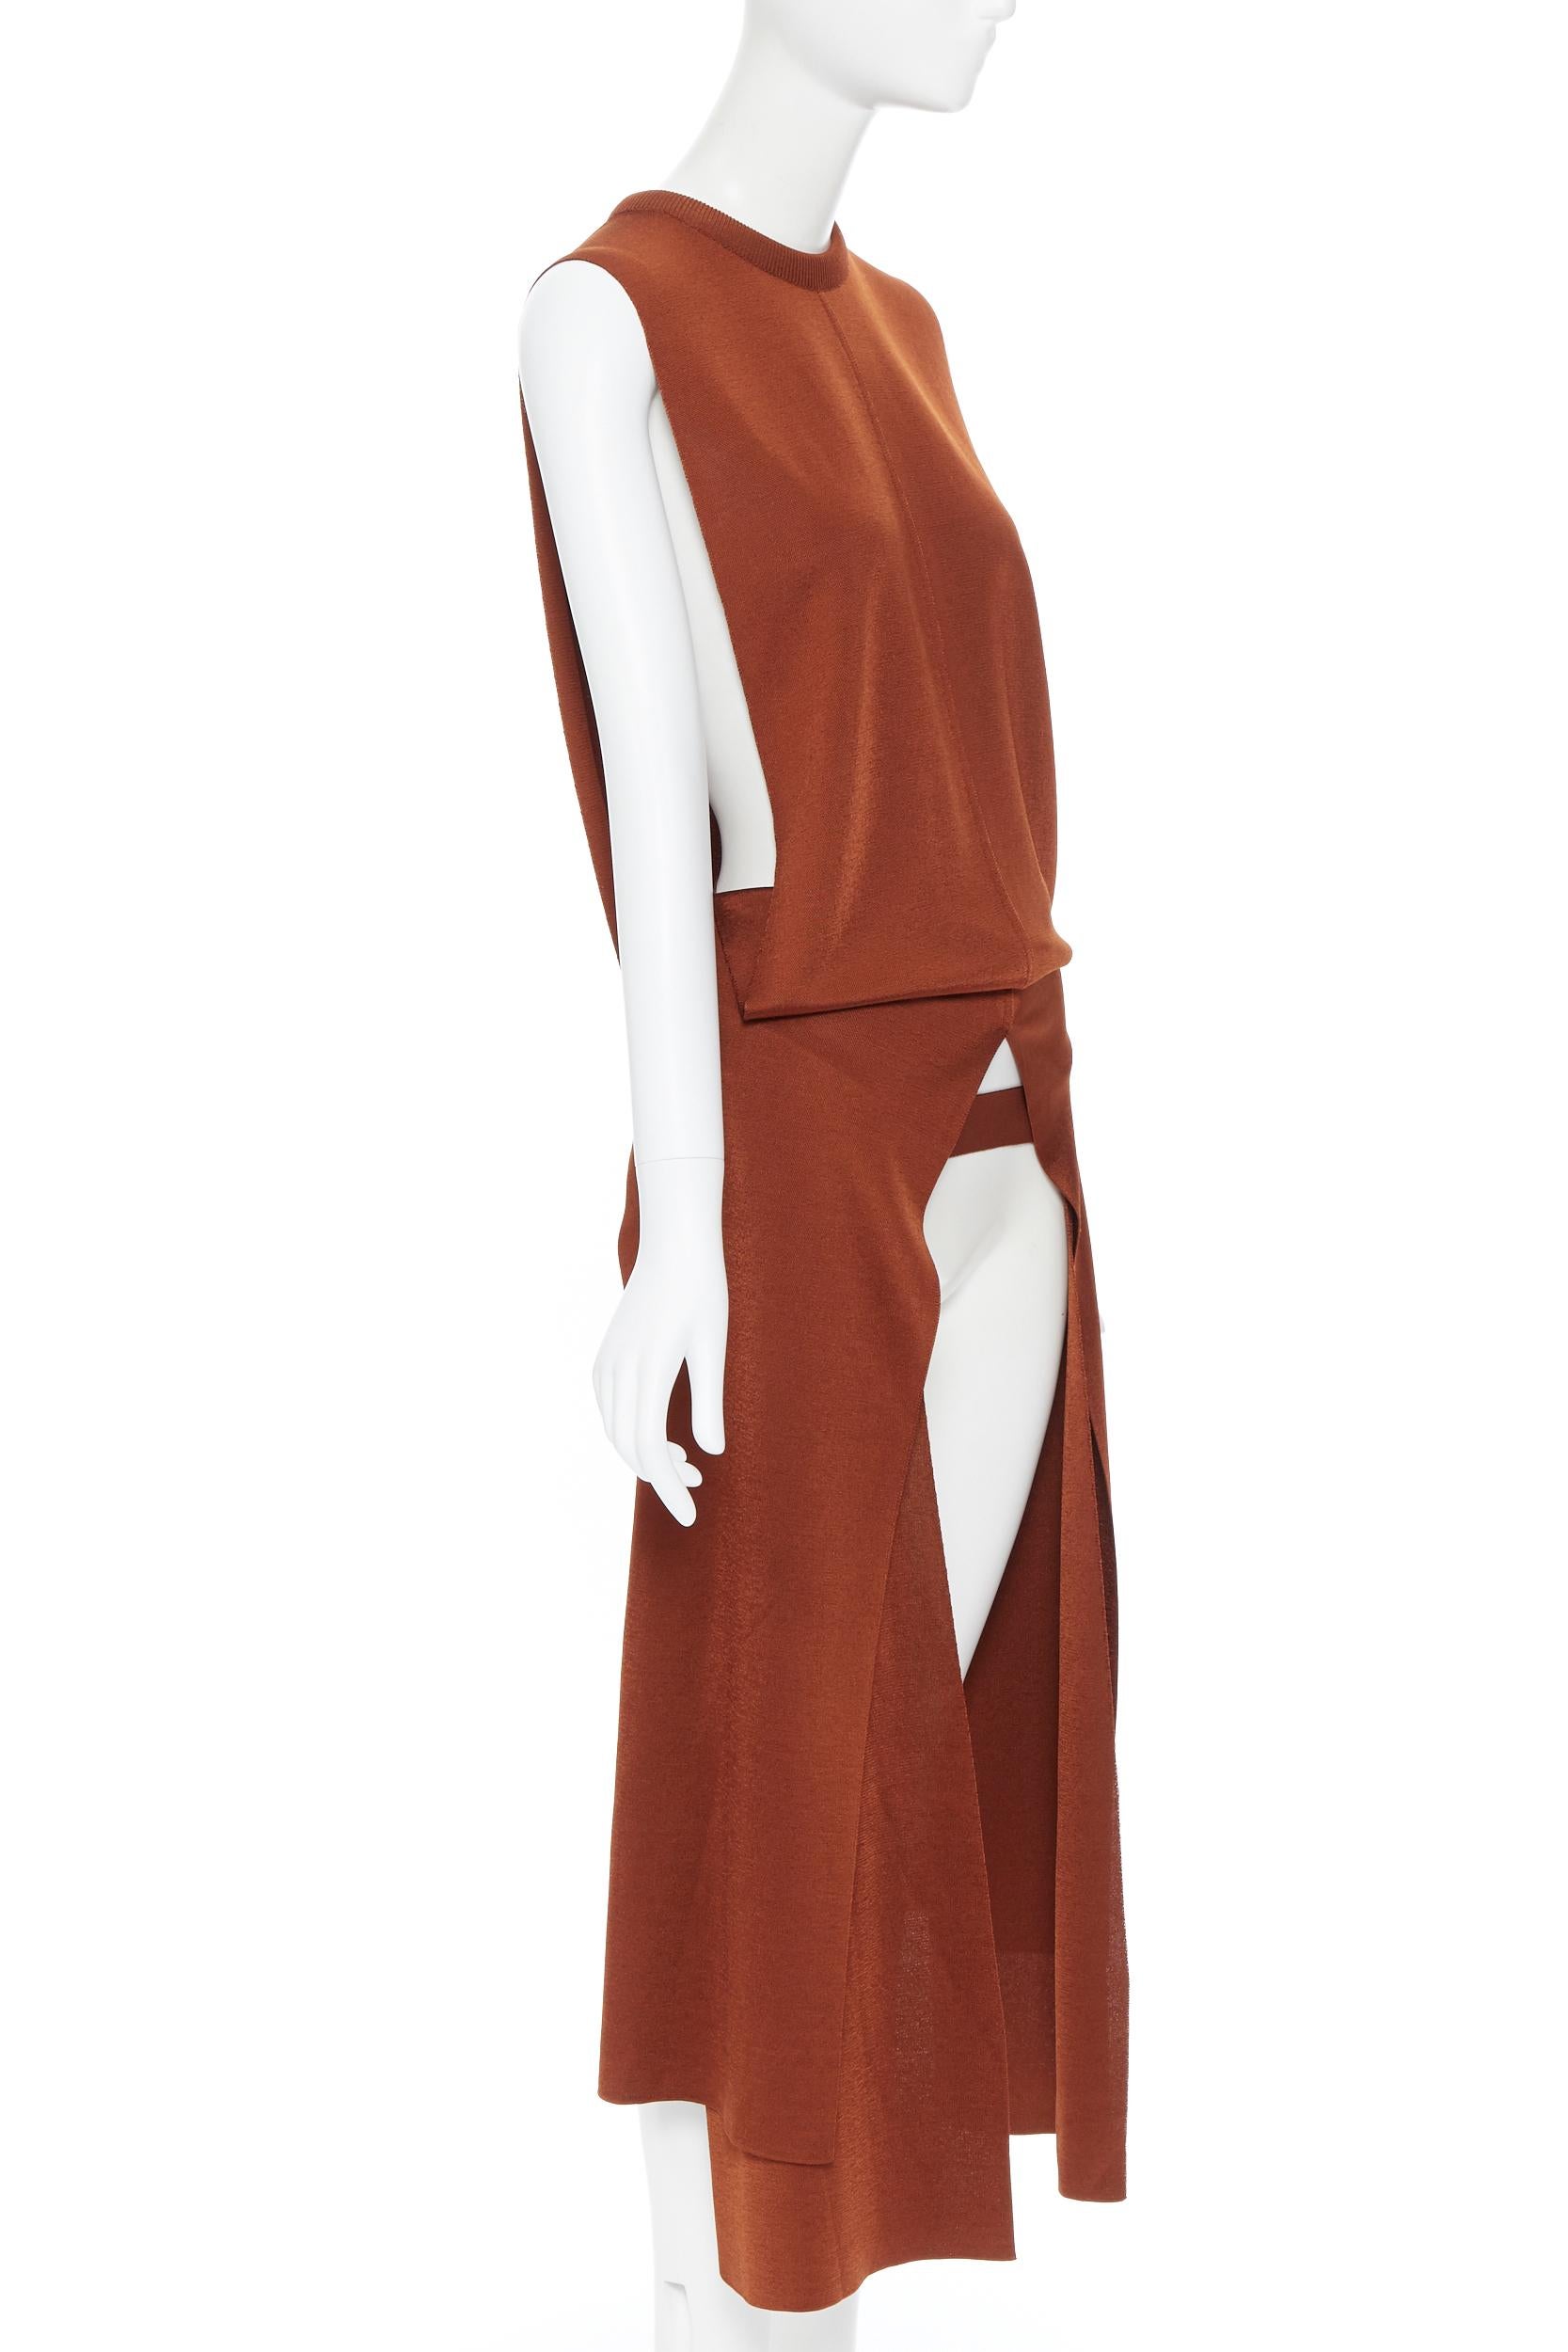 runway CHLOE AW18 brick knitted wrap belted slit front maxi sweater vest M
Brand: Chloe
Collection: AW2018
Model Name / Style: Maxi vest
Material: Viscose blend
Color: Brown
Pattern: Solid
Closure: Hook & Eye
Extra Detail: Constructed as an open